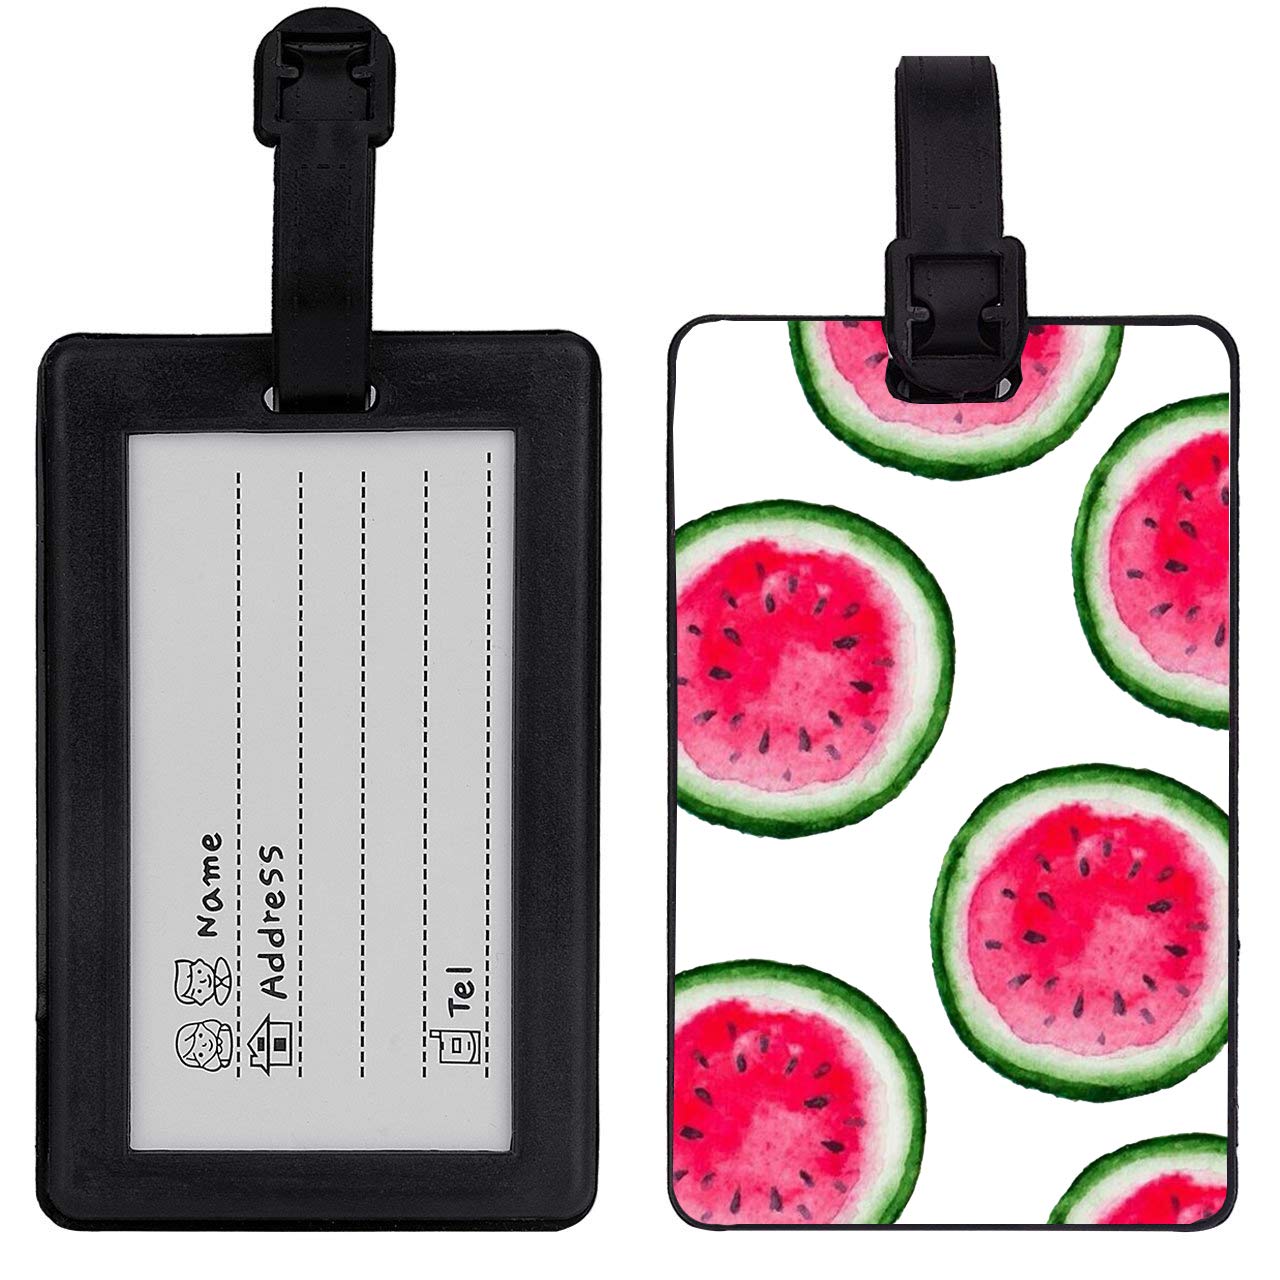 Hot Luggage Travel Bag Tags – Watermelon Pattern with Steel Loops American Tourister luggage sets (Black)